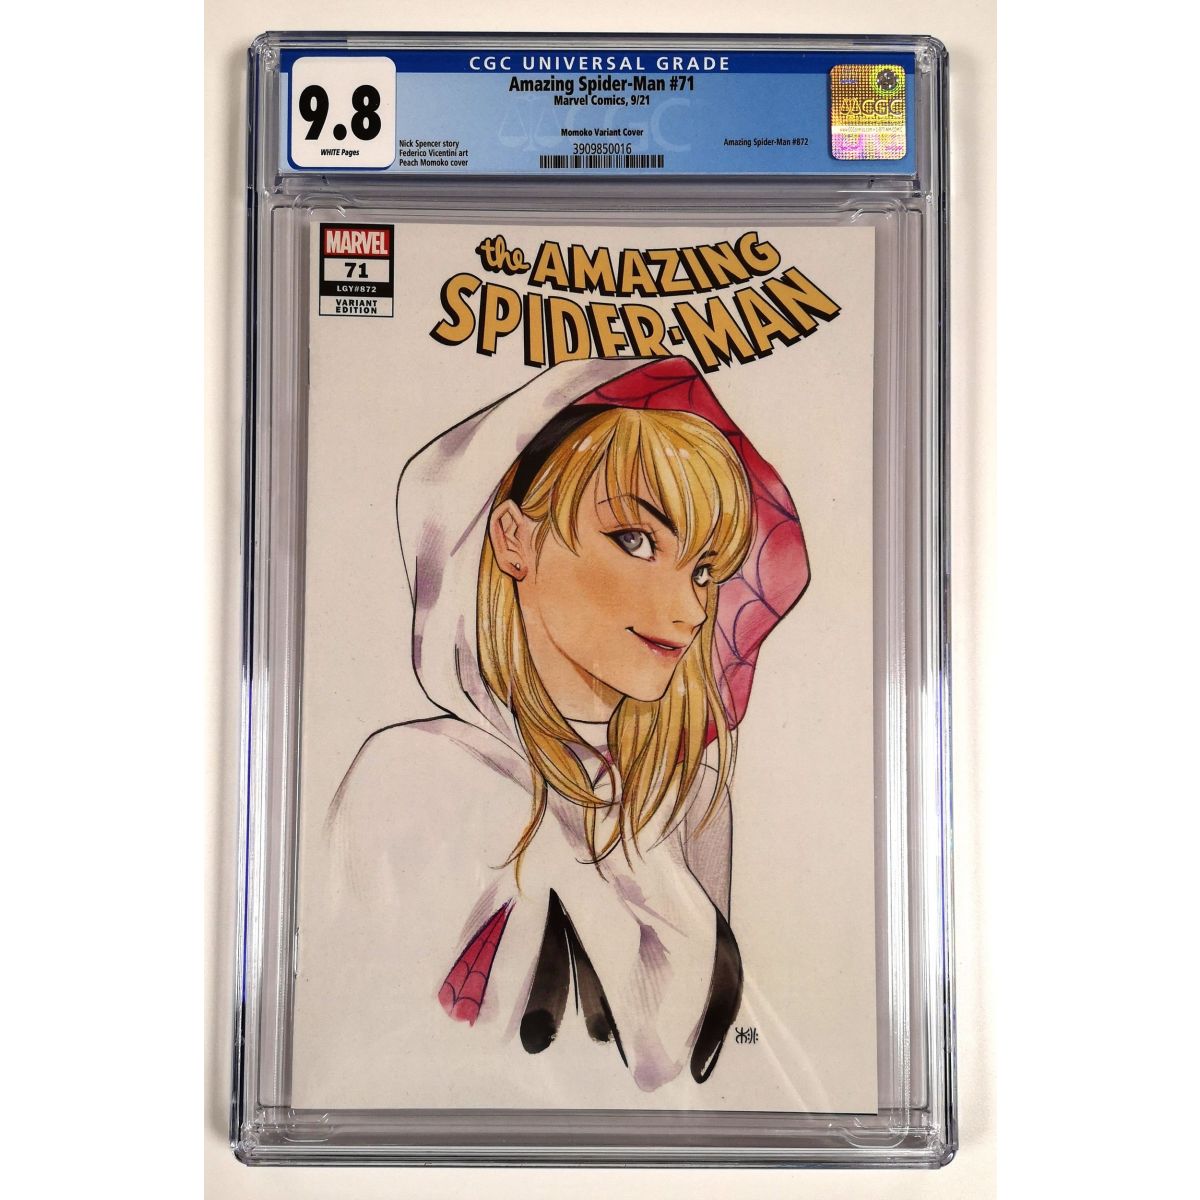 Item Comics - Marvel - Amazing Spider-Man N°71 (2018 6th Series) - [CGC 9.8 - White Pages]